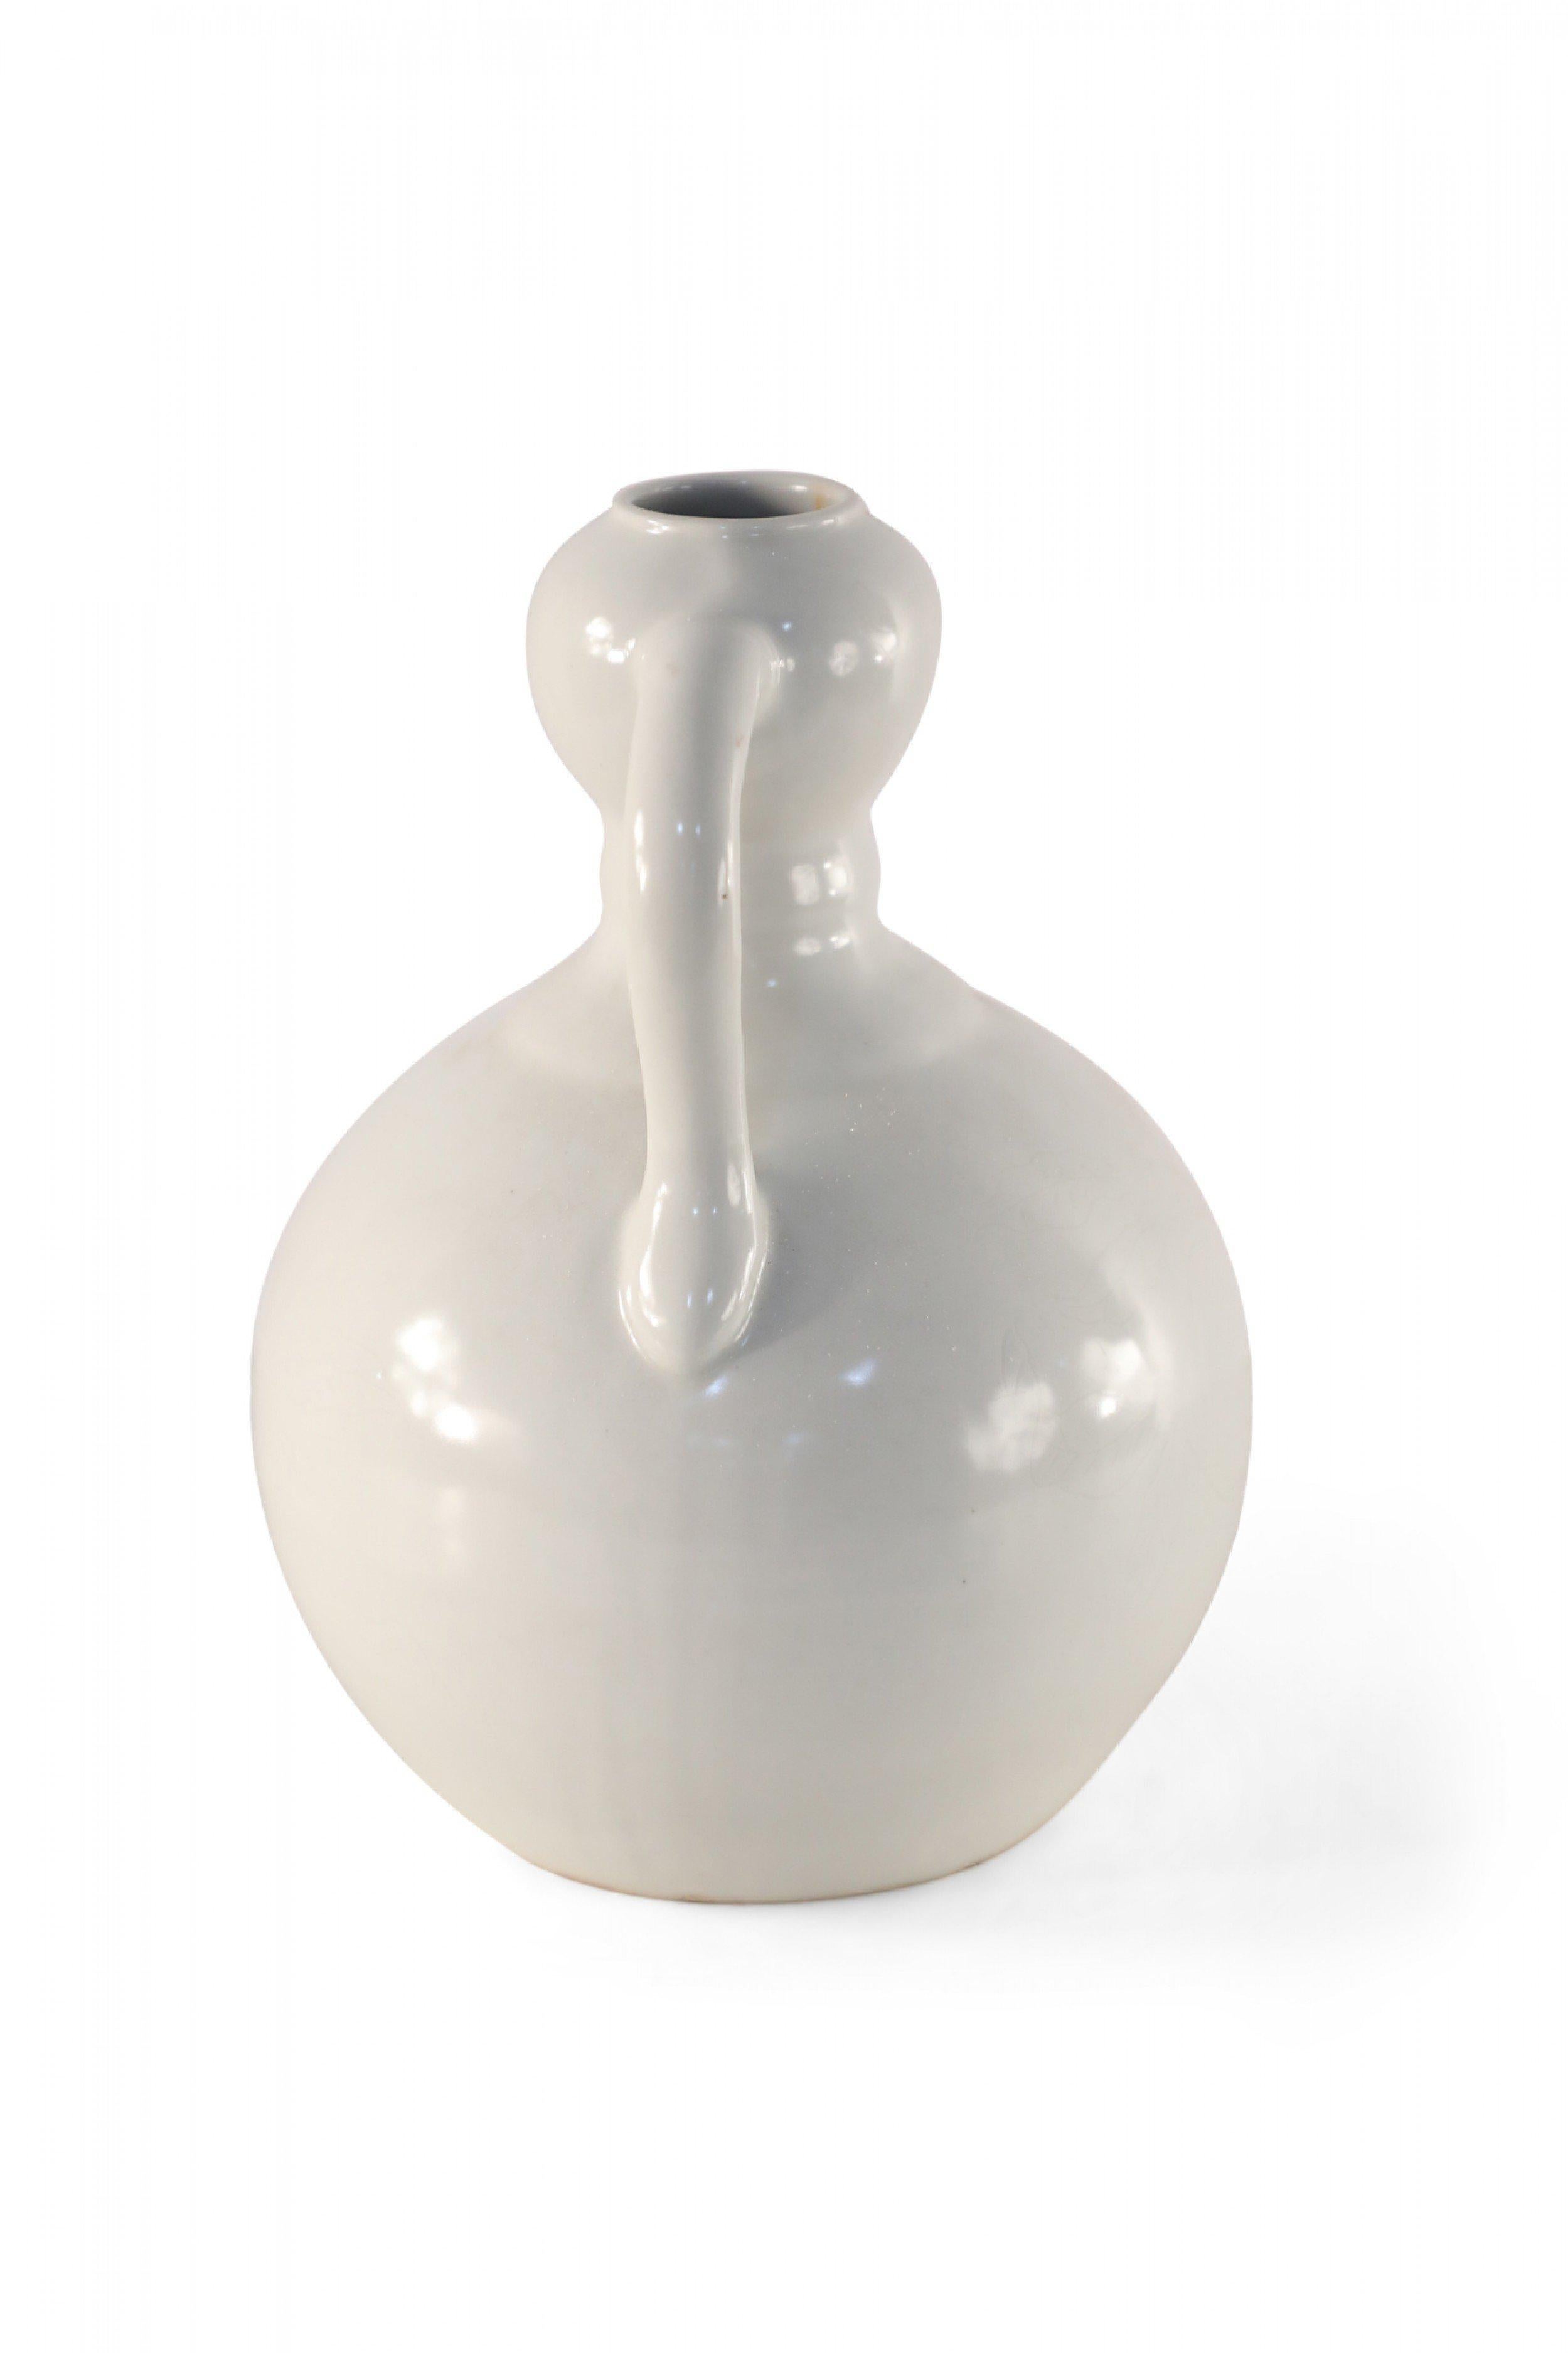 Chinese off-white porcelain, gourd-shaped double ear vase decorated in highly subtle tonal lemons, swirling clouds and writing, and accented with two shouldered handles connecting the top and bottom (date mark on bottom).